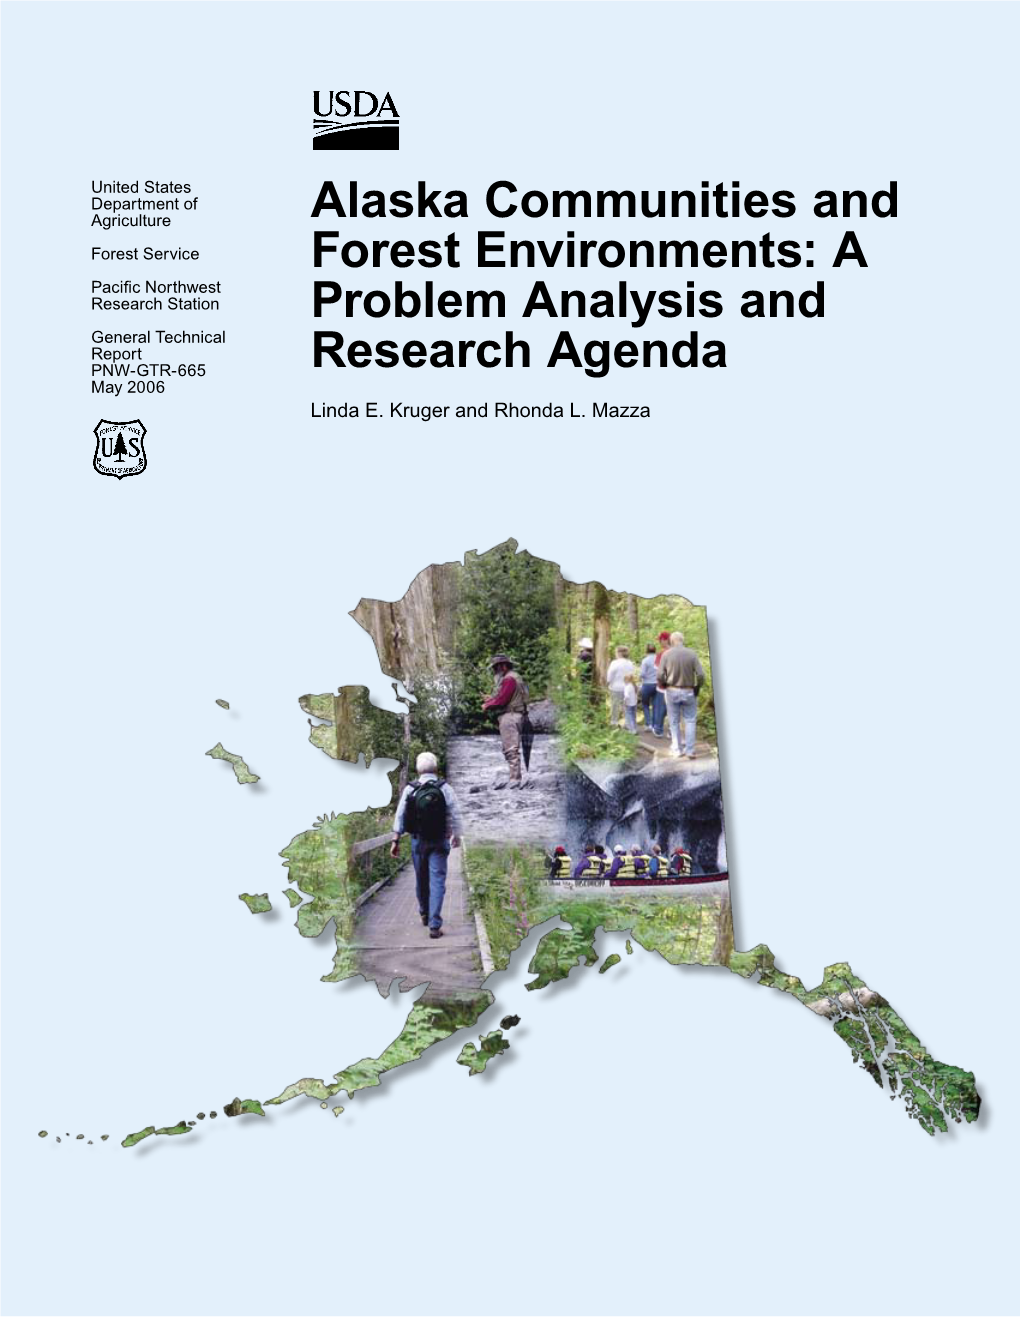 Alaska Communities and Forest Environments: a Problem Analysis and Research Agenda